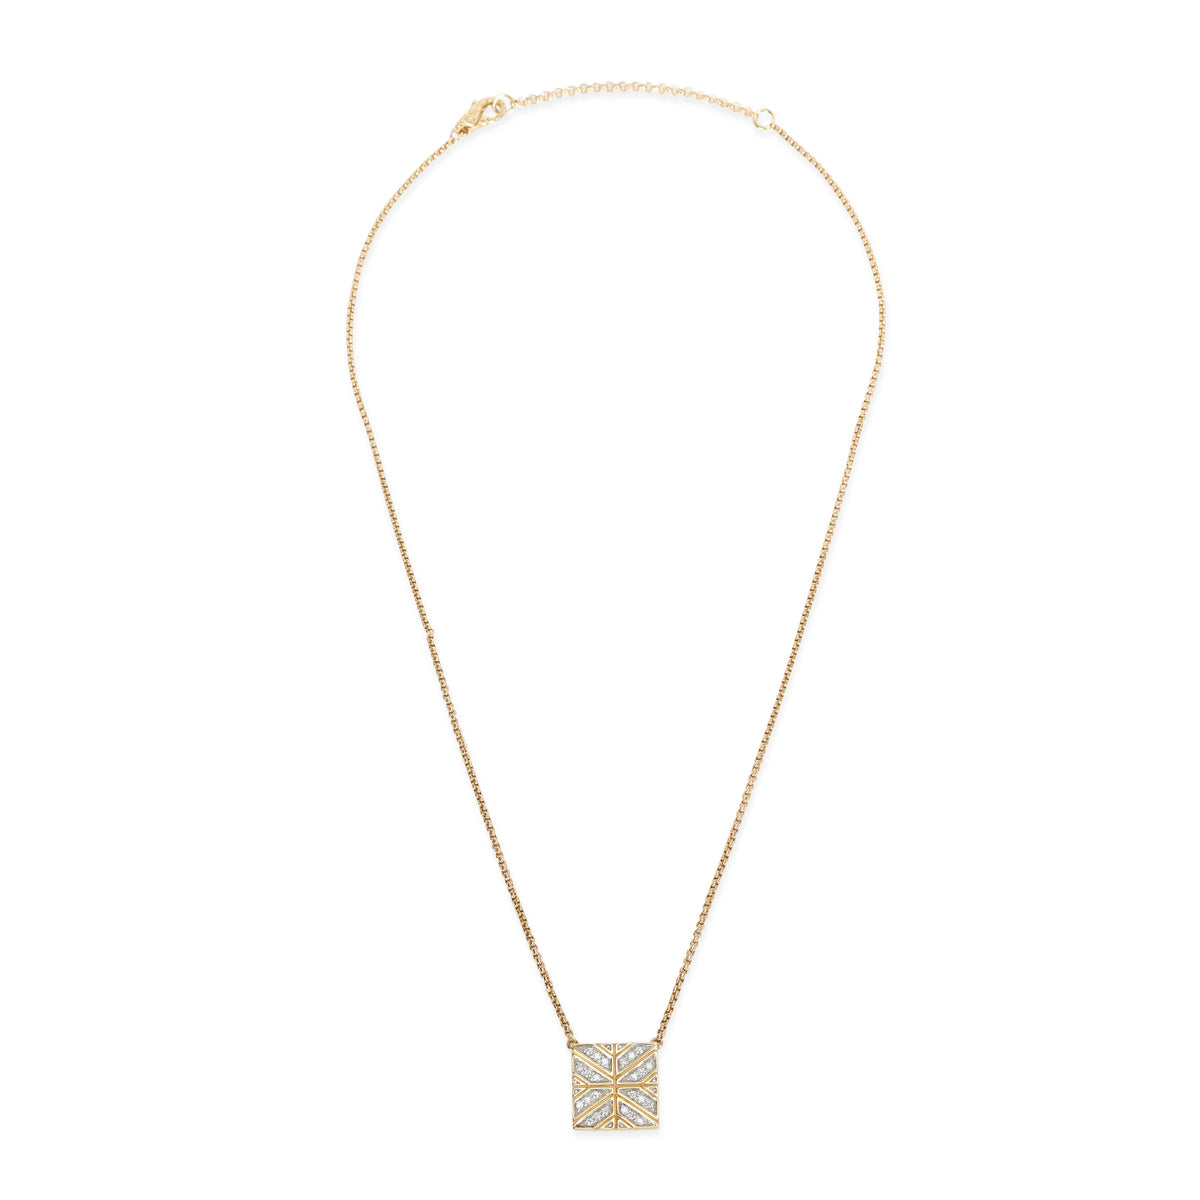 John Hardy Modern Chain Collection Diamond Fashion Necklace in 18K Yellow Gold 0